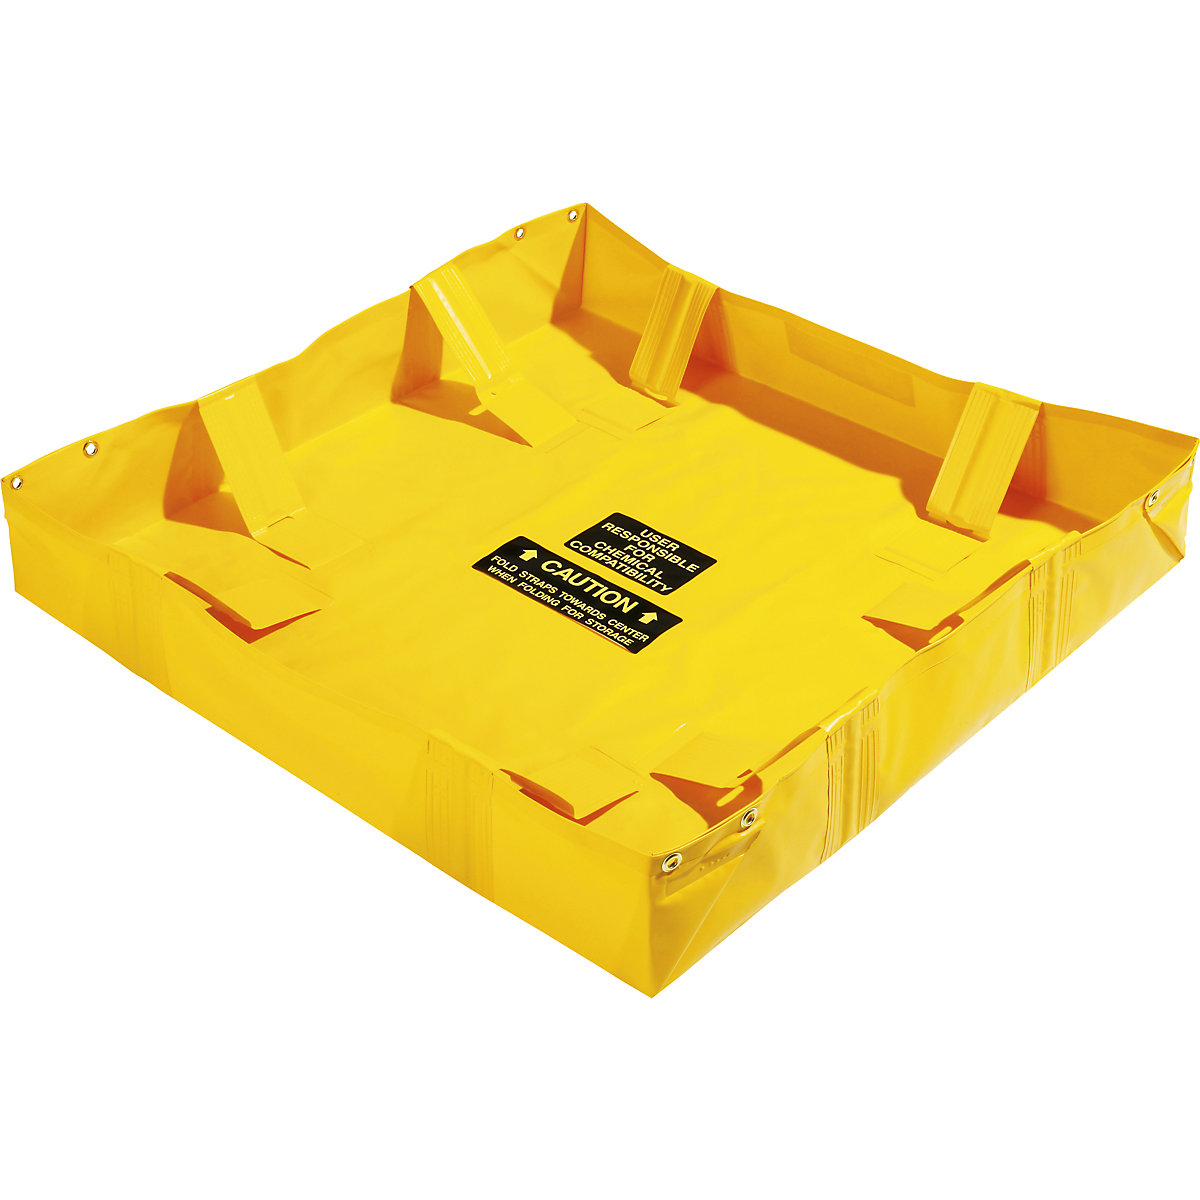 Collapse-A-Tainer® Lite emergency folding tray – PIG